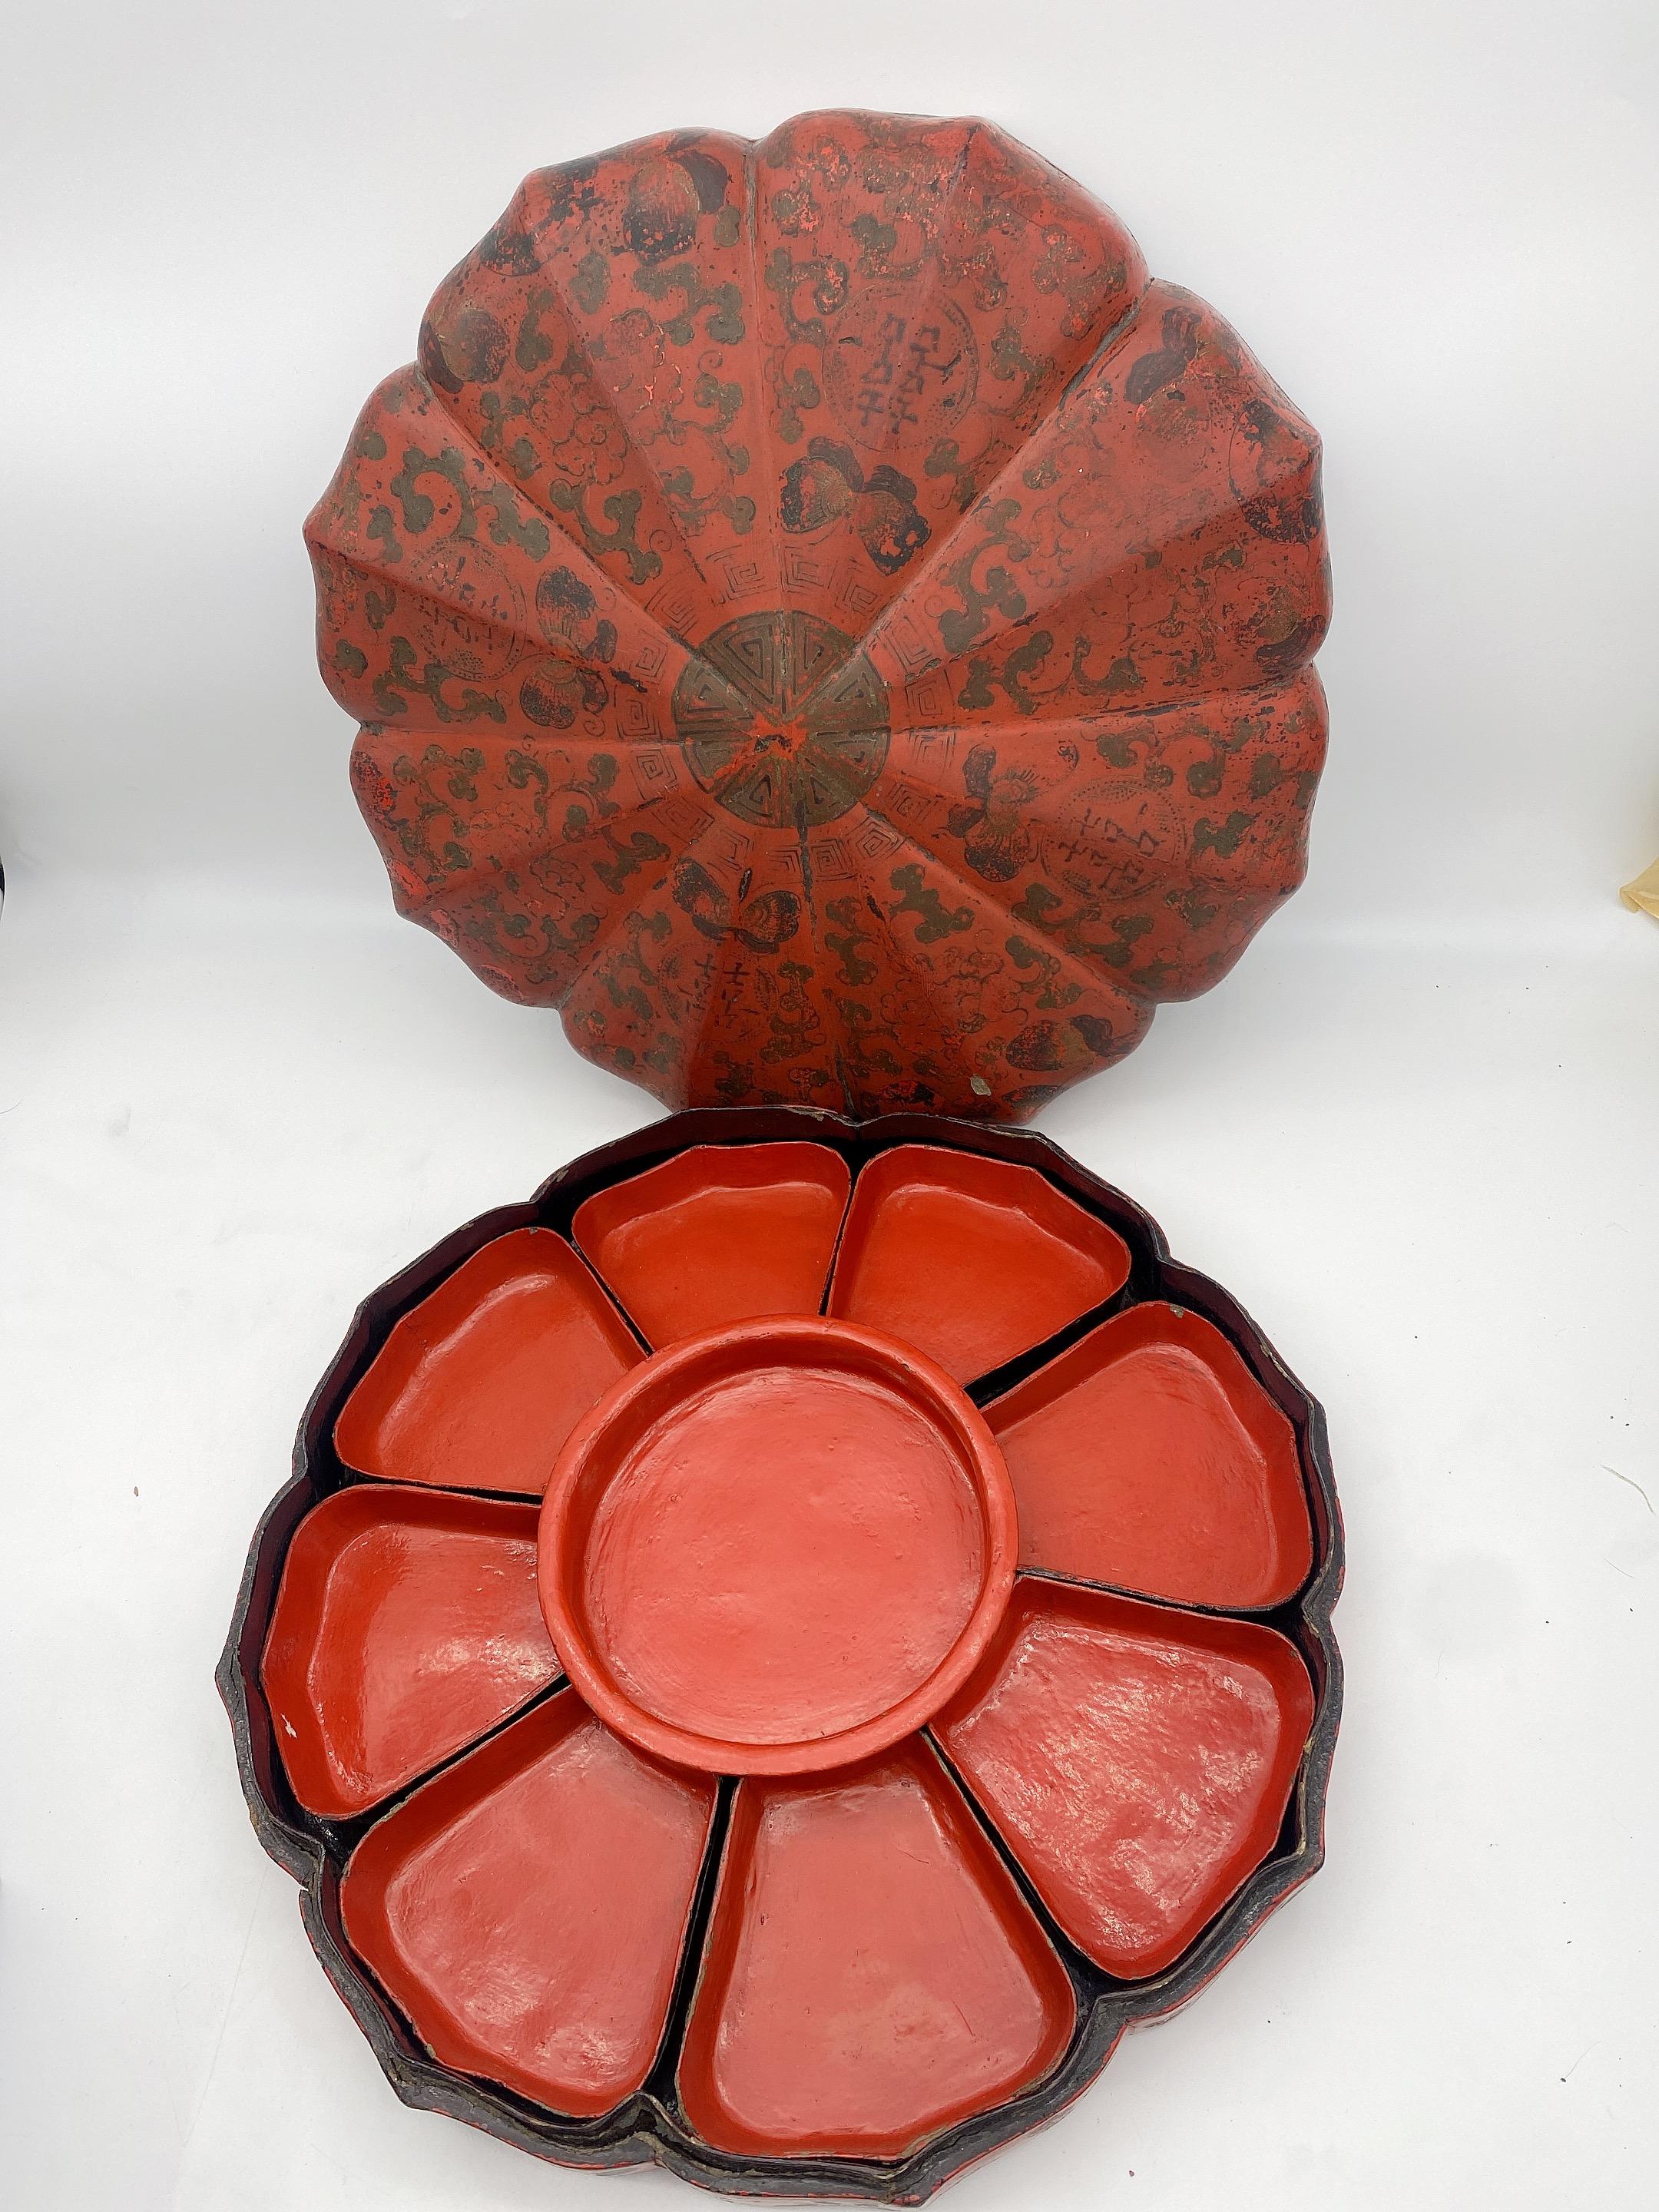 Qing Dynasty Chinese wooden red lacquered presentation box, lovely and beautiful red lacquer box with popular snacks like roasted melon seeds, dried fruit, this auspicious objects are surrounded by double happiness, butterflies, clouds and plum